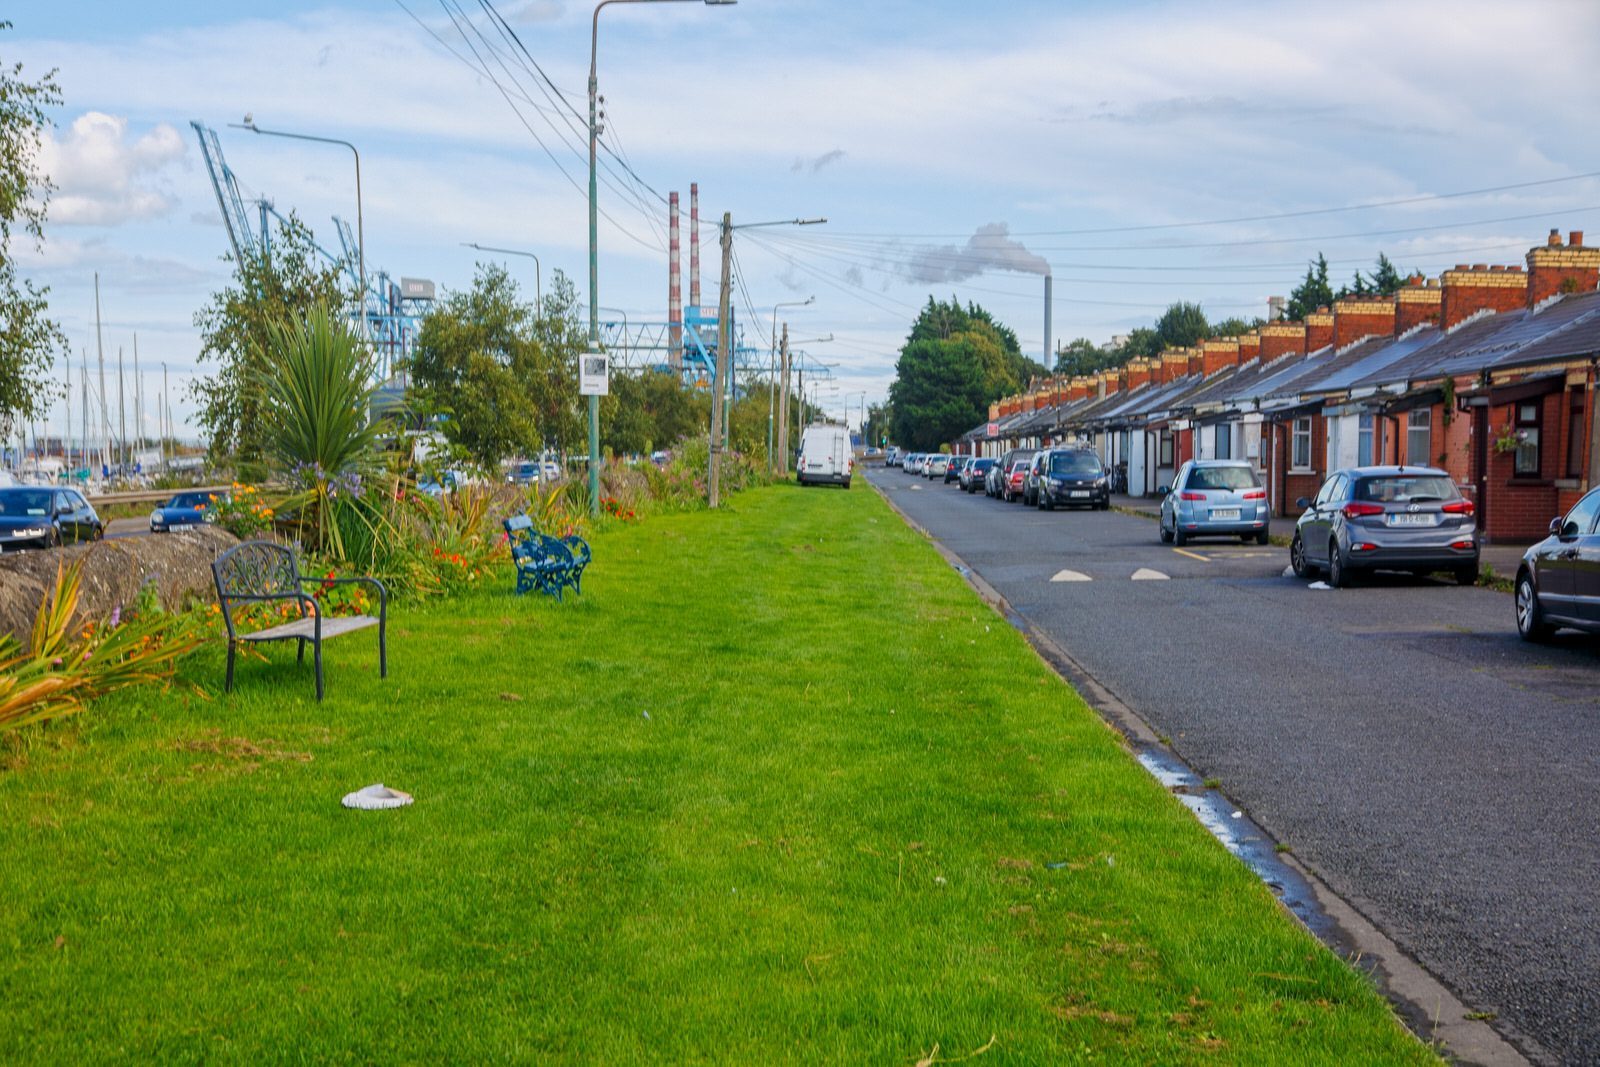 PIGEON HOUSE ROAD IN RINGSEND [IS A COMPLEX OF STREETS RATHER THAN A SINGLE STREET] 003